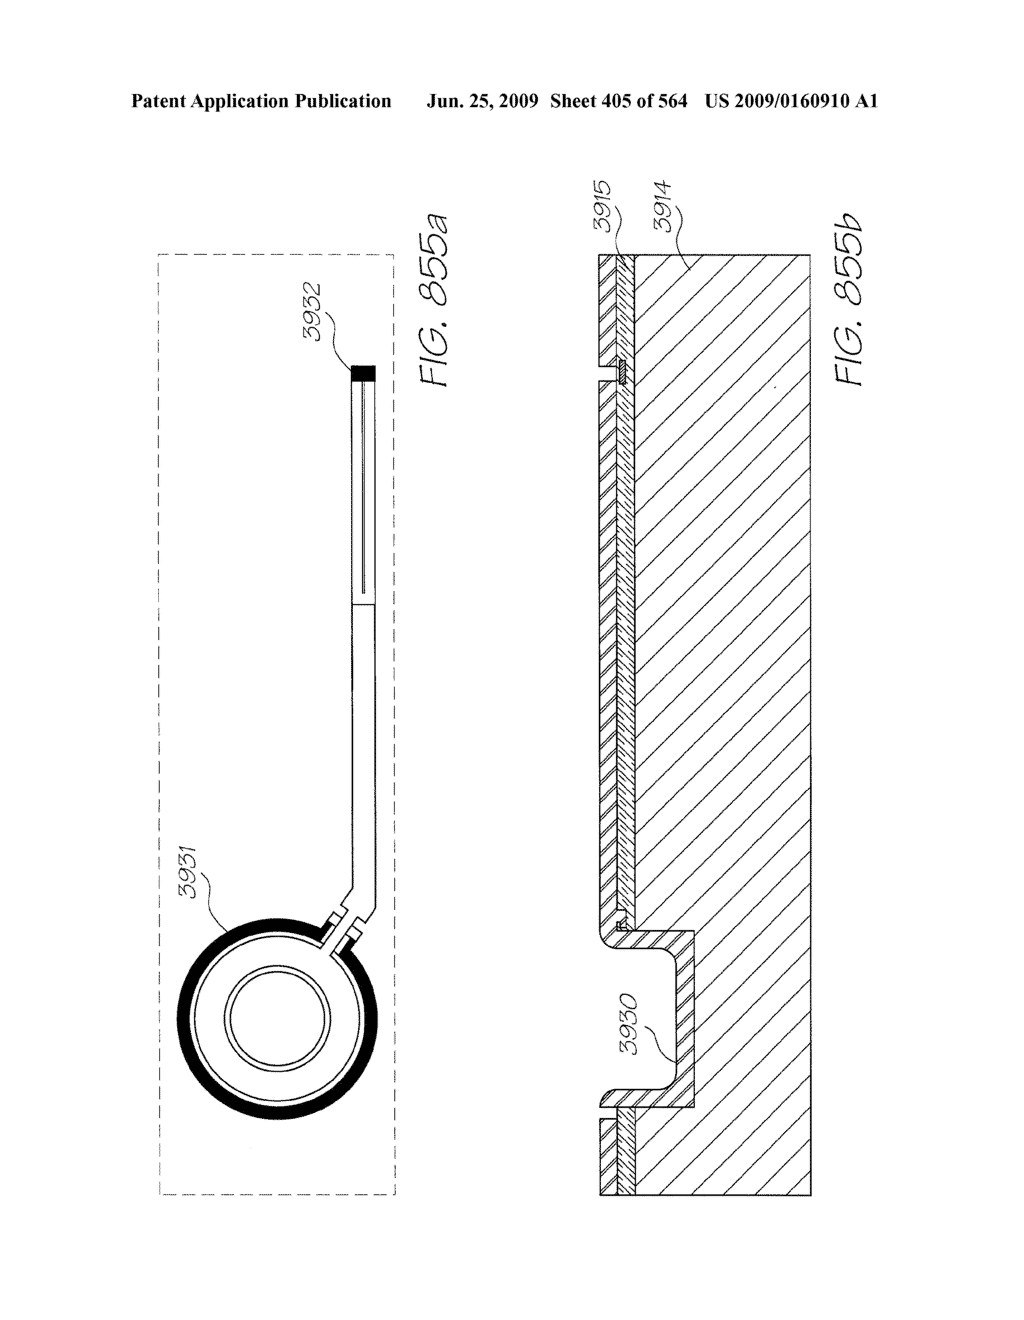 INKJET PRINTHEAD WITH HEATER ELEMENT CLOSE TO DRIVE CIRCUITS - diagram, schematic, and image 406